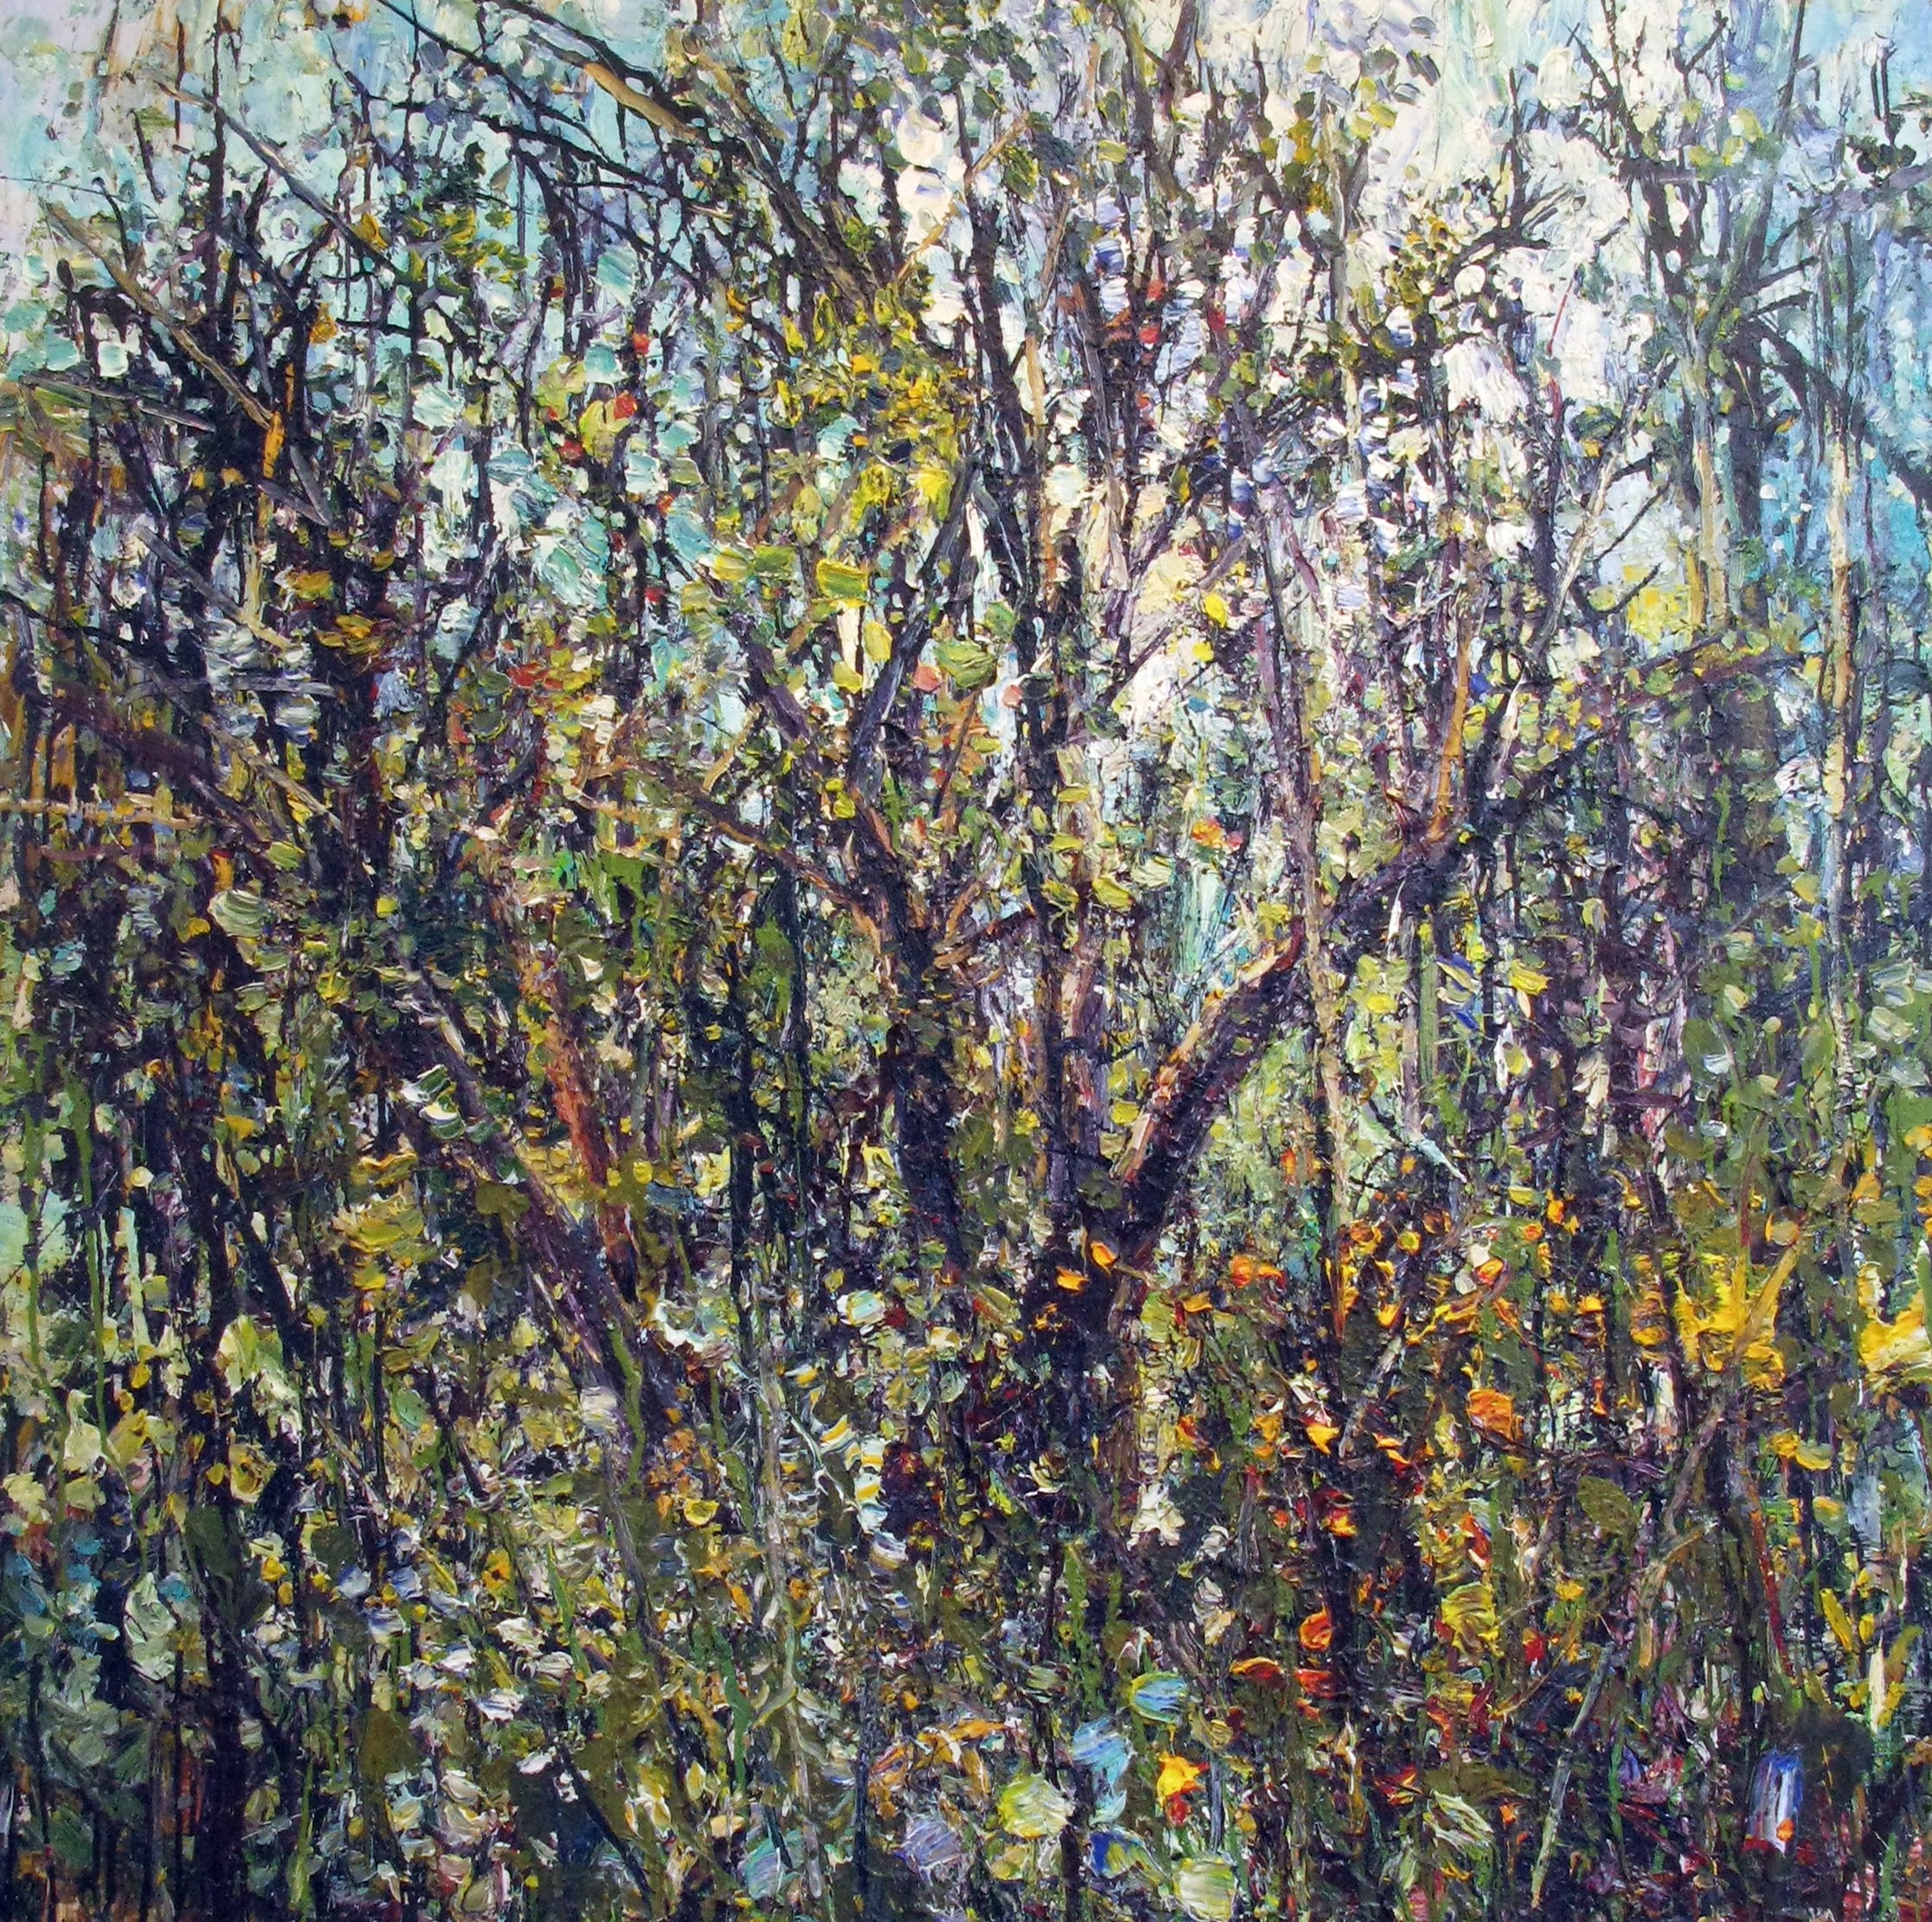   Ferals   These paintings are fractured, chaotic and dense, revelling in the vitality of their subjects. Apple trees were brought by the early settlers, but many trees escaped cultivation. The feral descendants of these now grow entangled in the cha